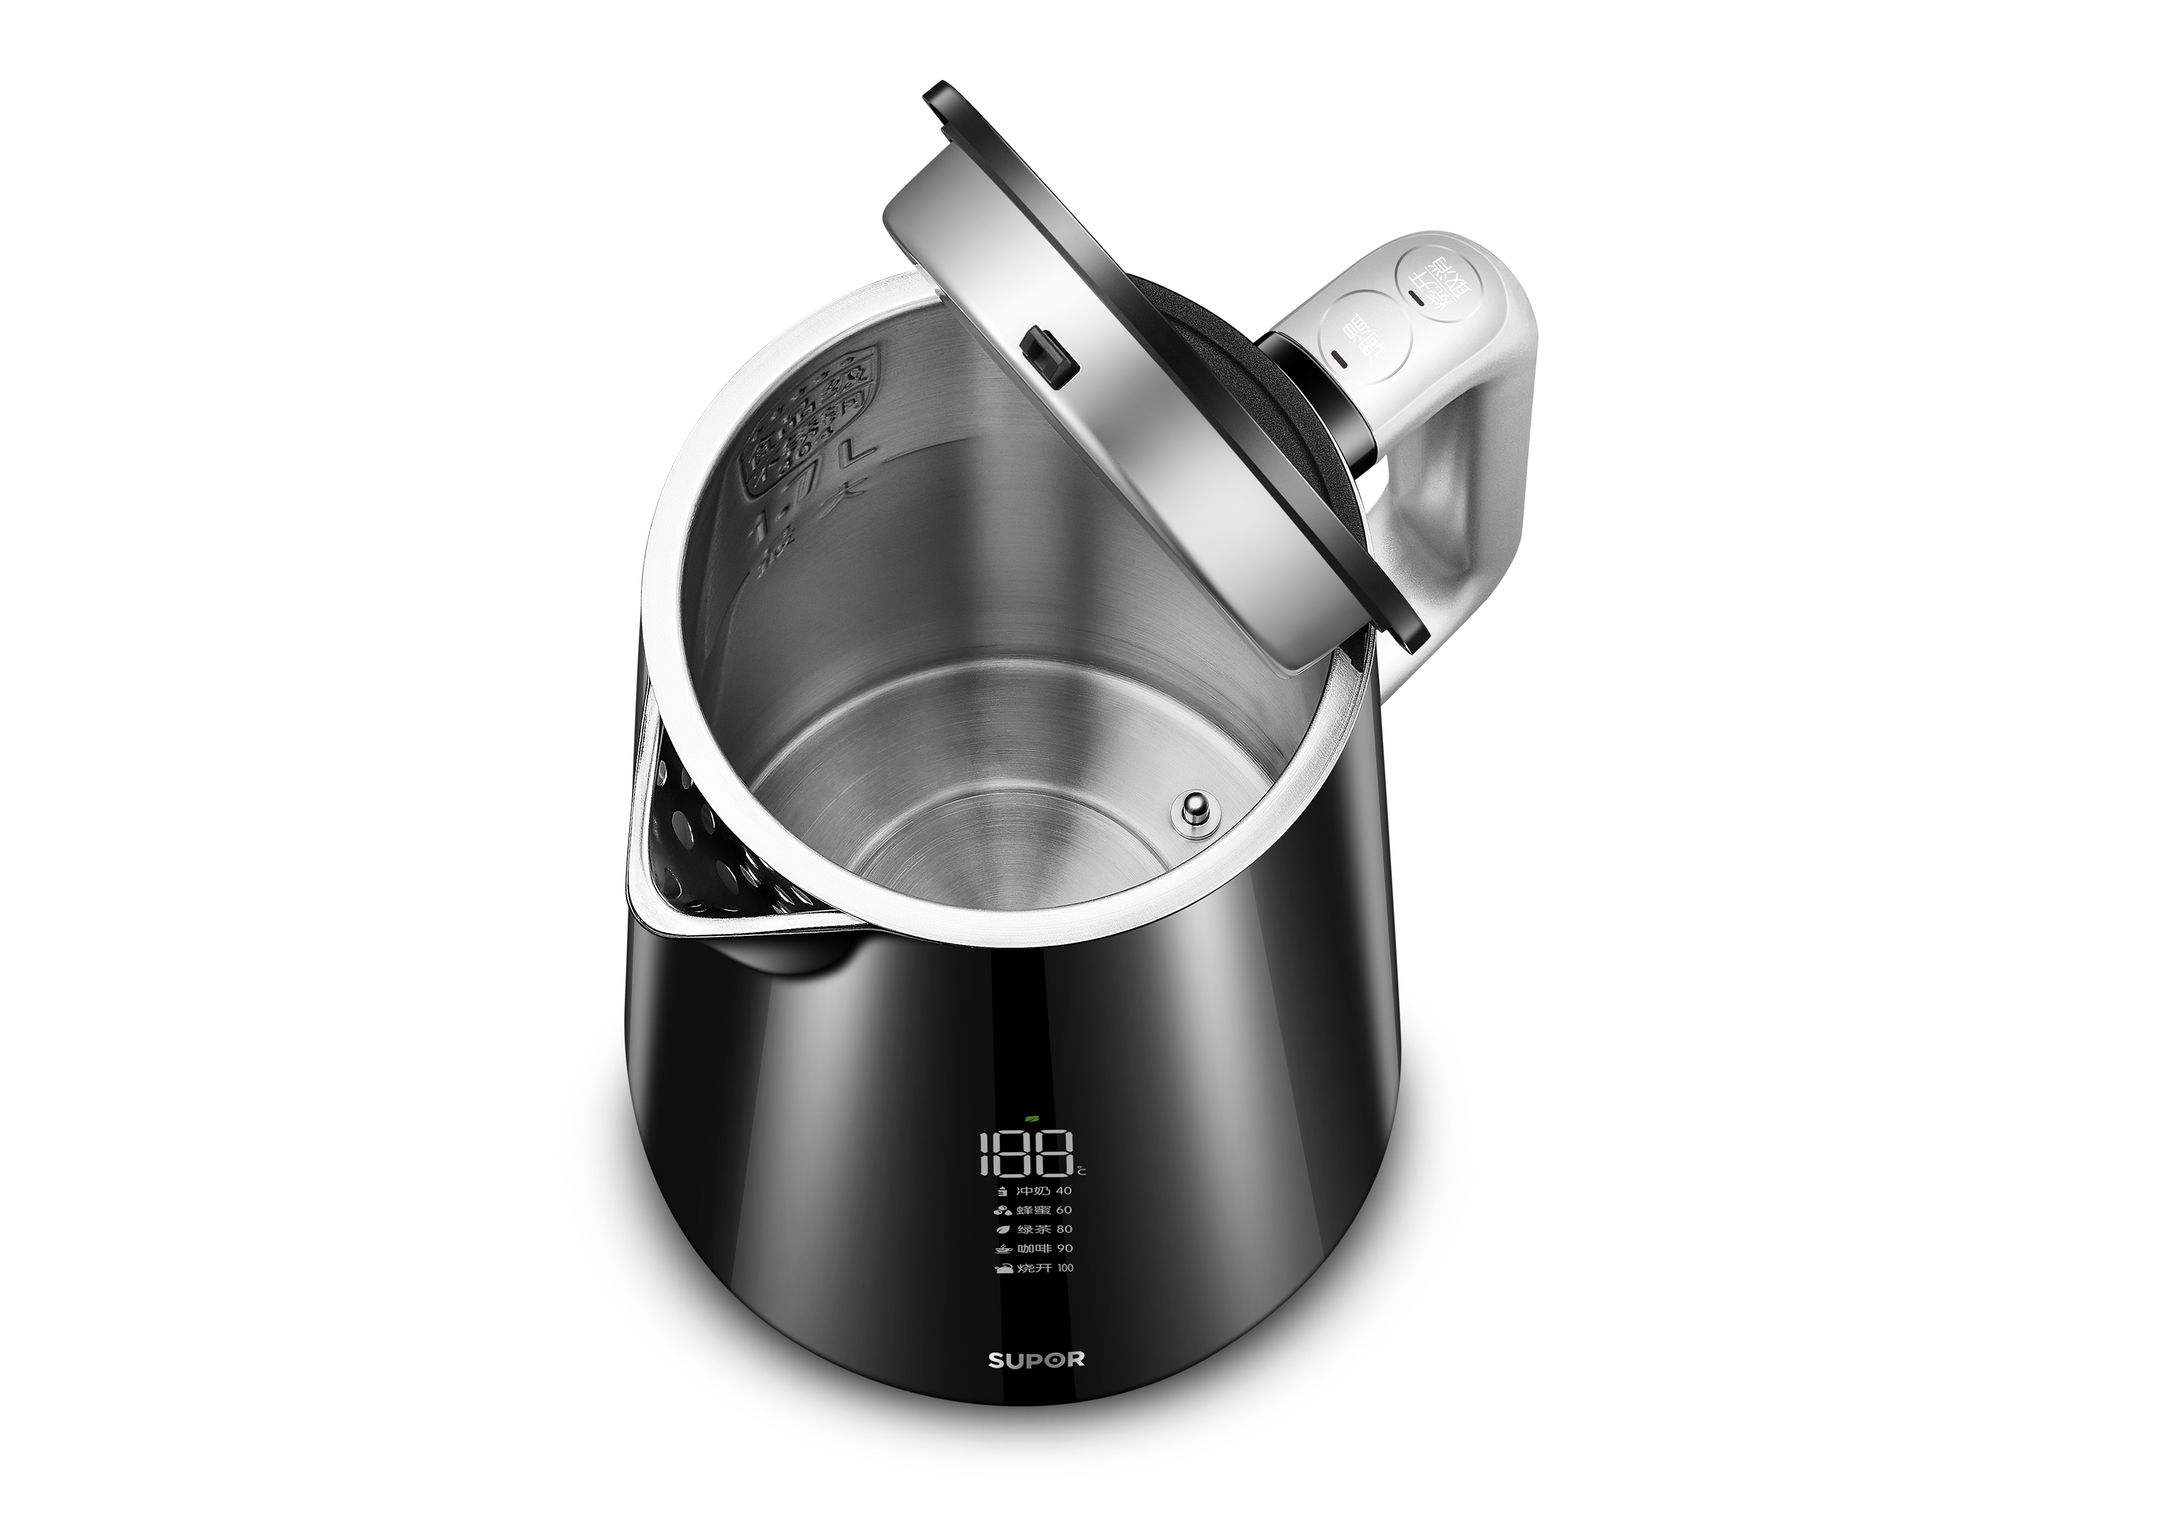 Displaying Electric kettle